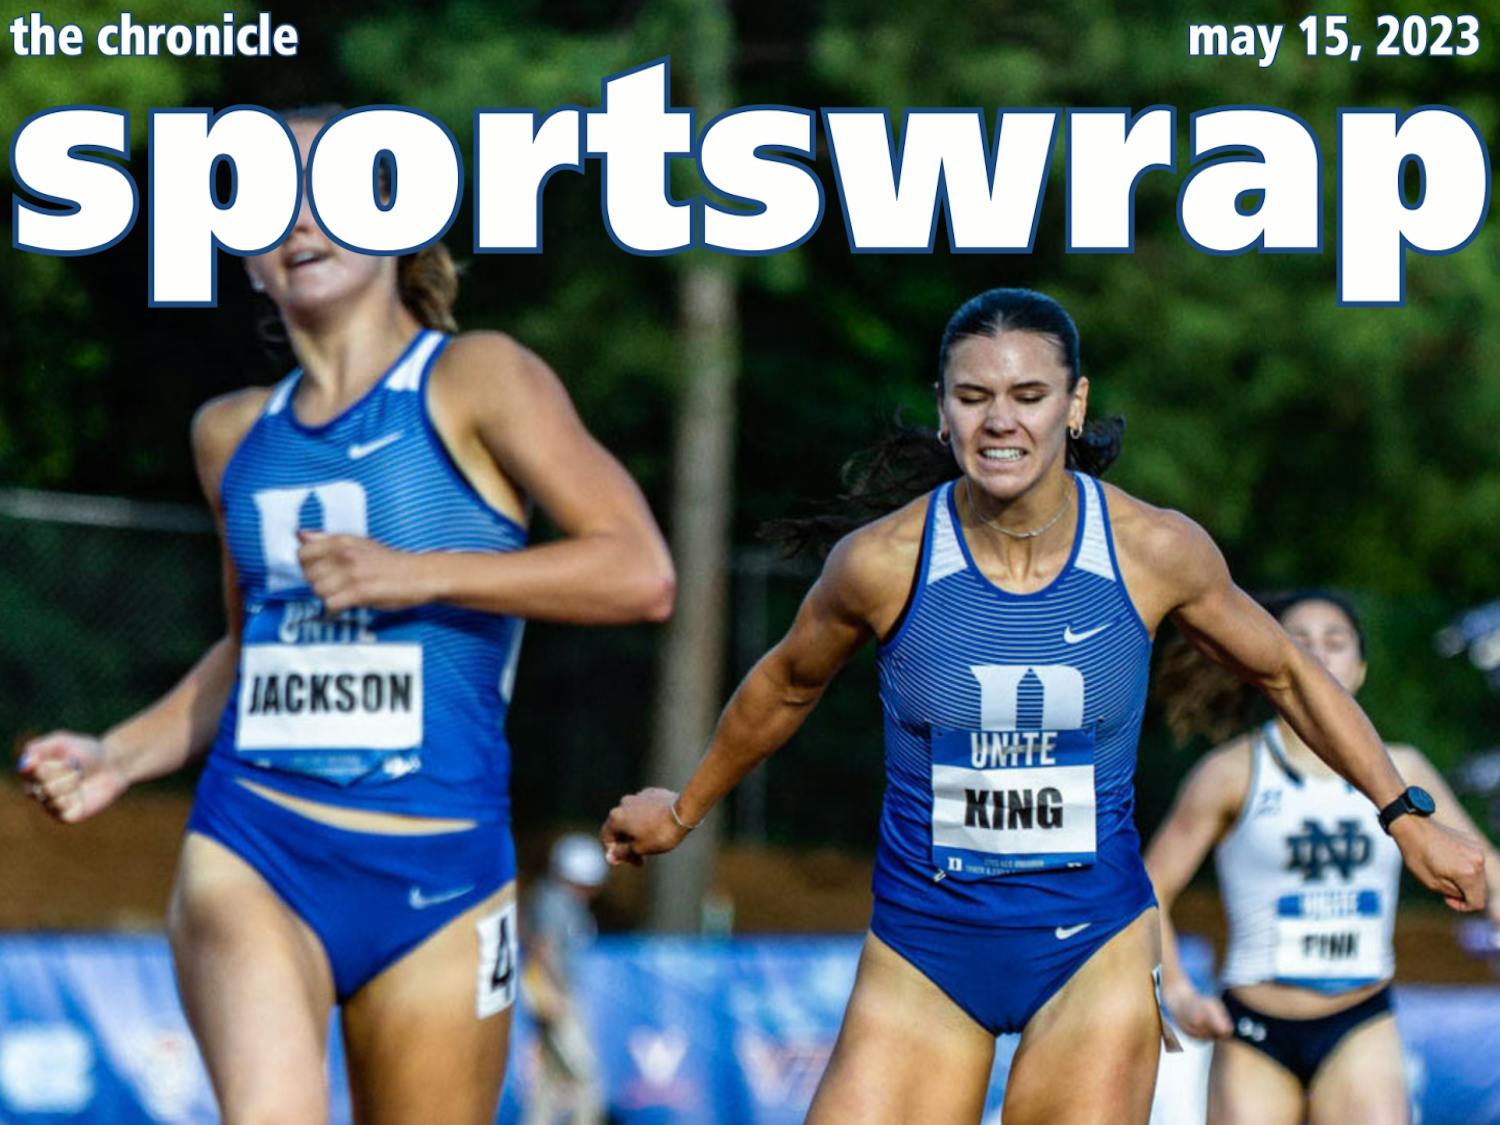 Duke's women's track and field team won the ACC Championships with a record-setting score over the weekend.